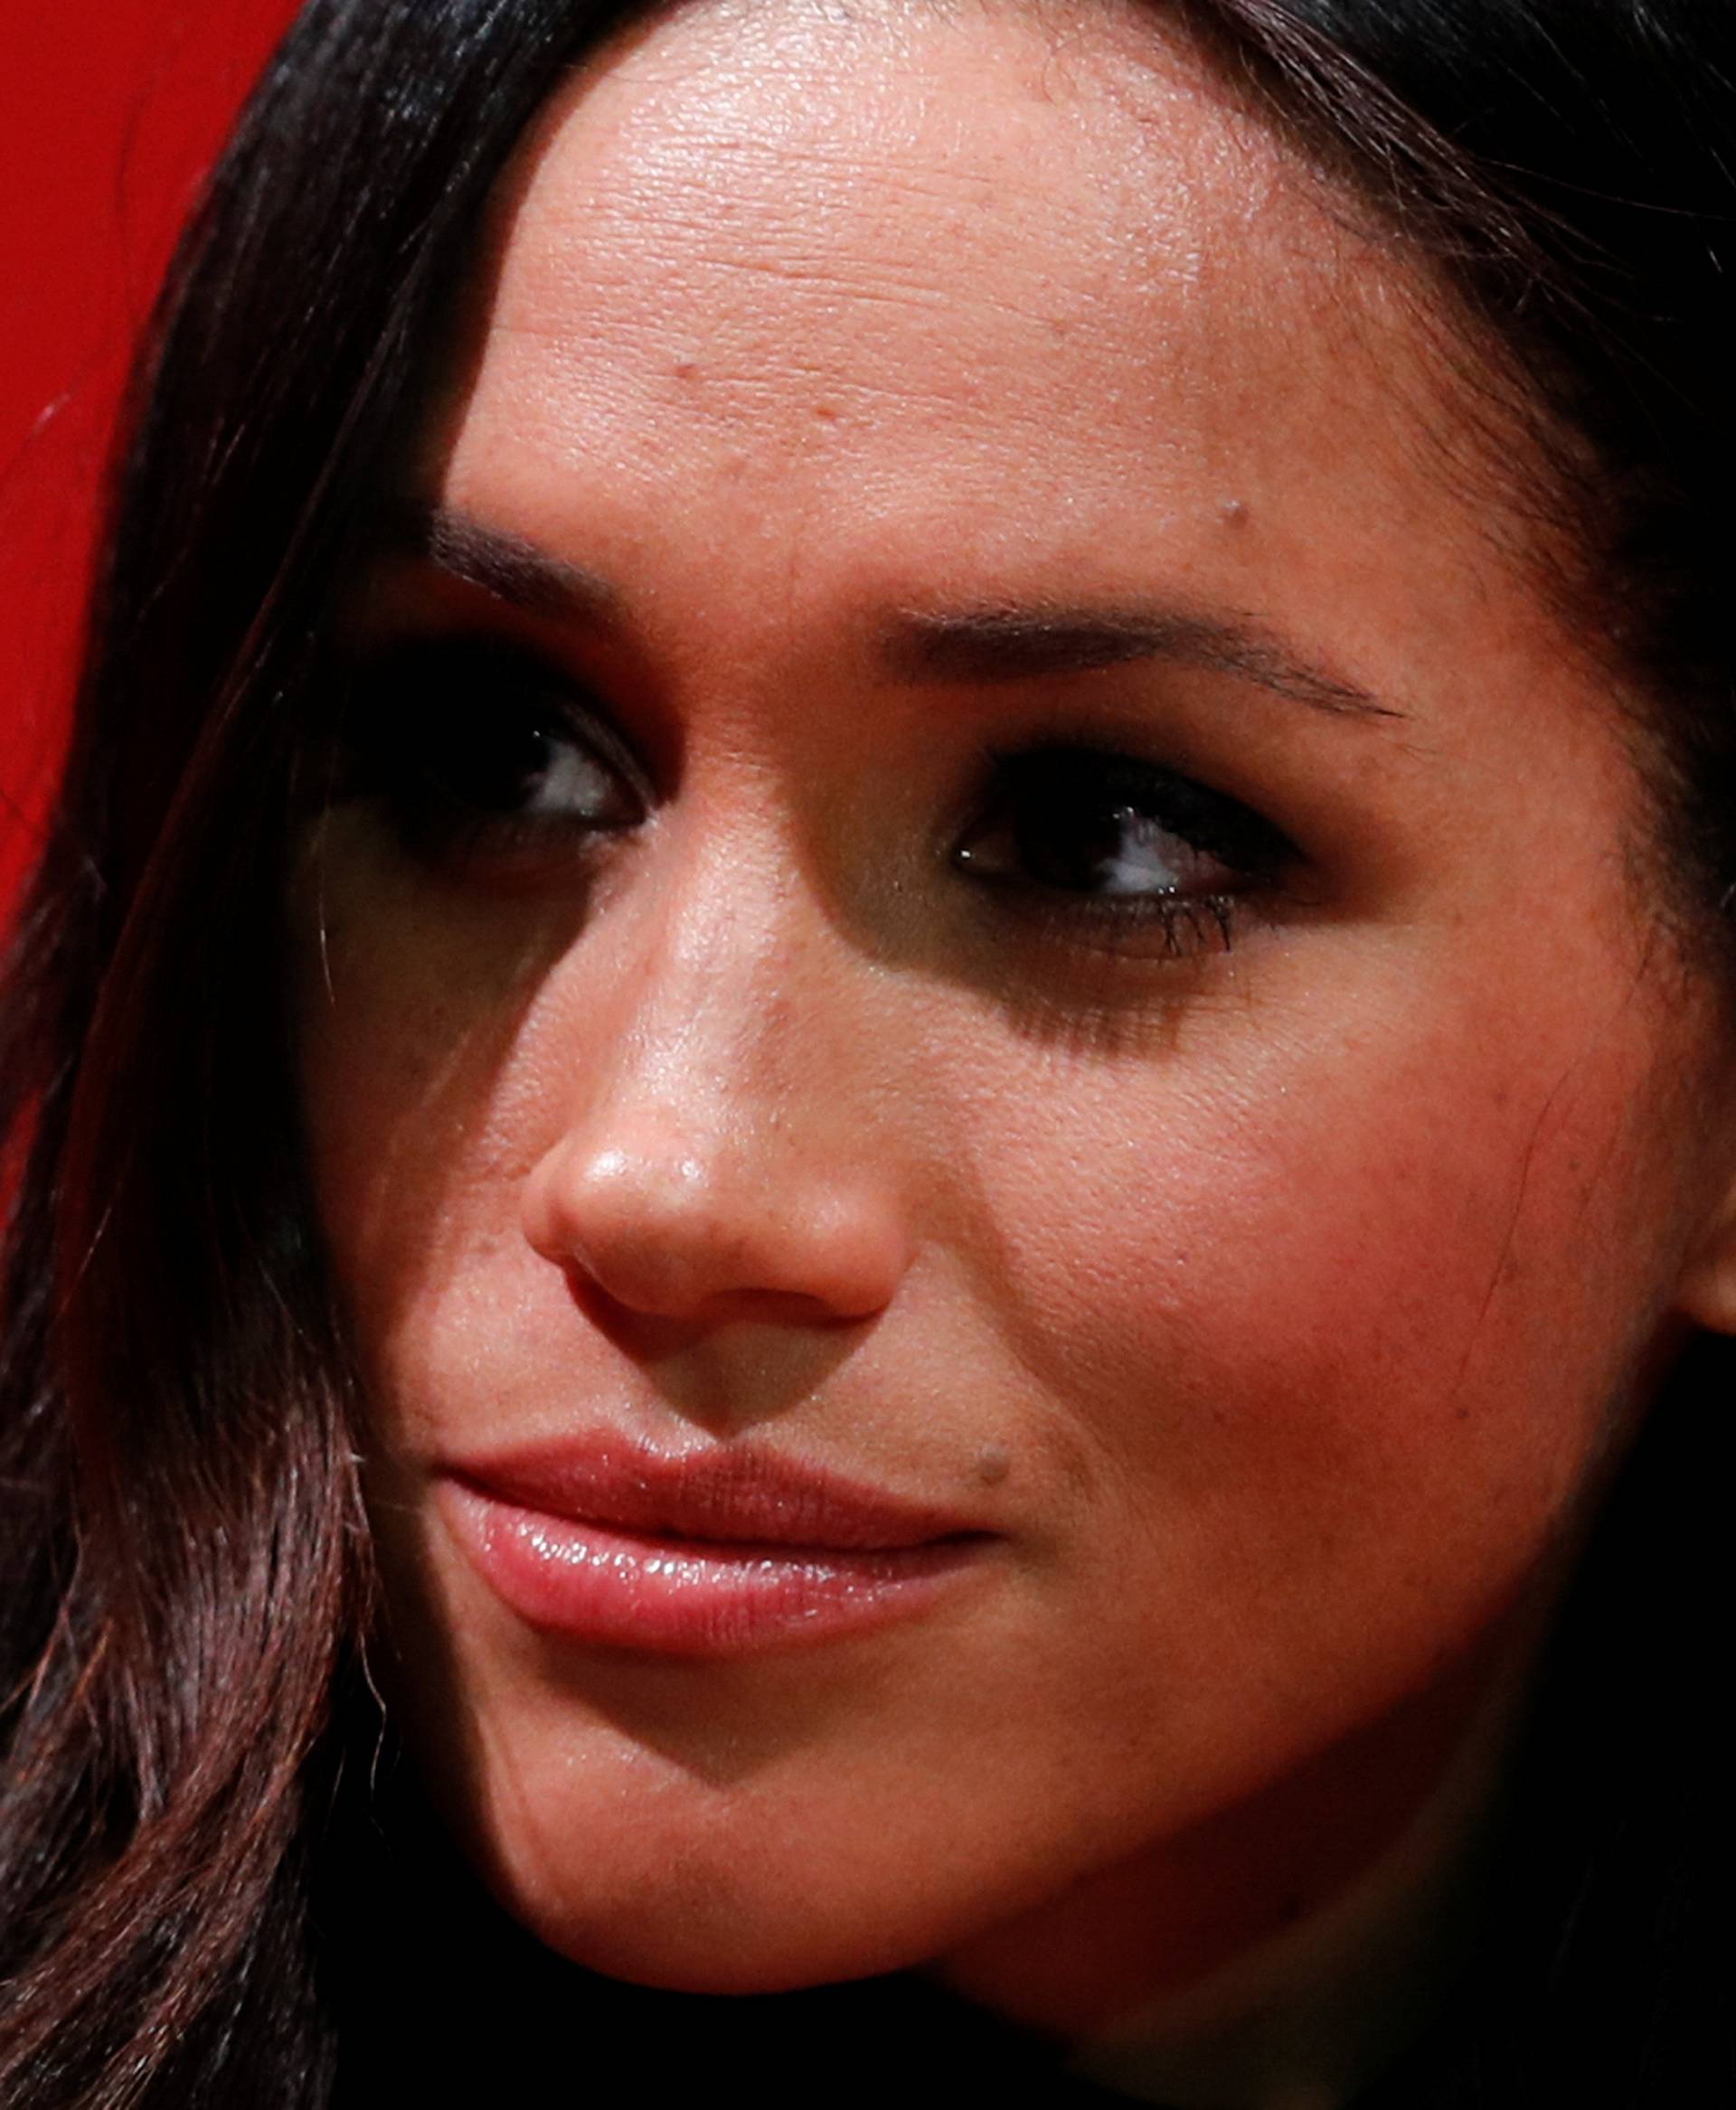 Meghan Markle visits the Terrence Higgins Trust World AIDS Day charity fair at Nottingham Contemporary with her fiancee Britain's Prince Harry, in Nottingham